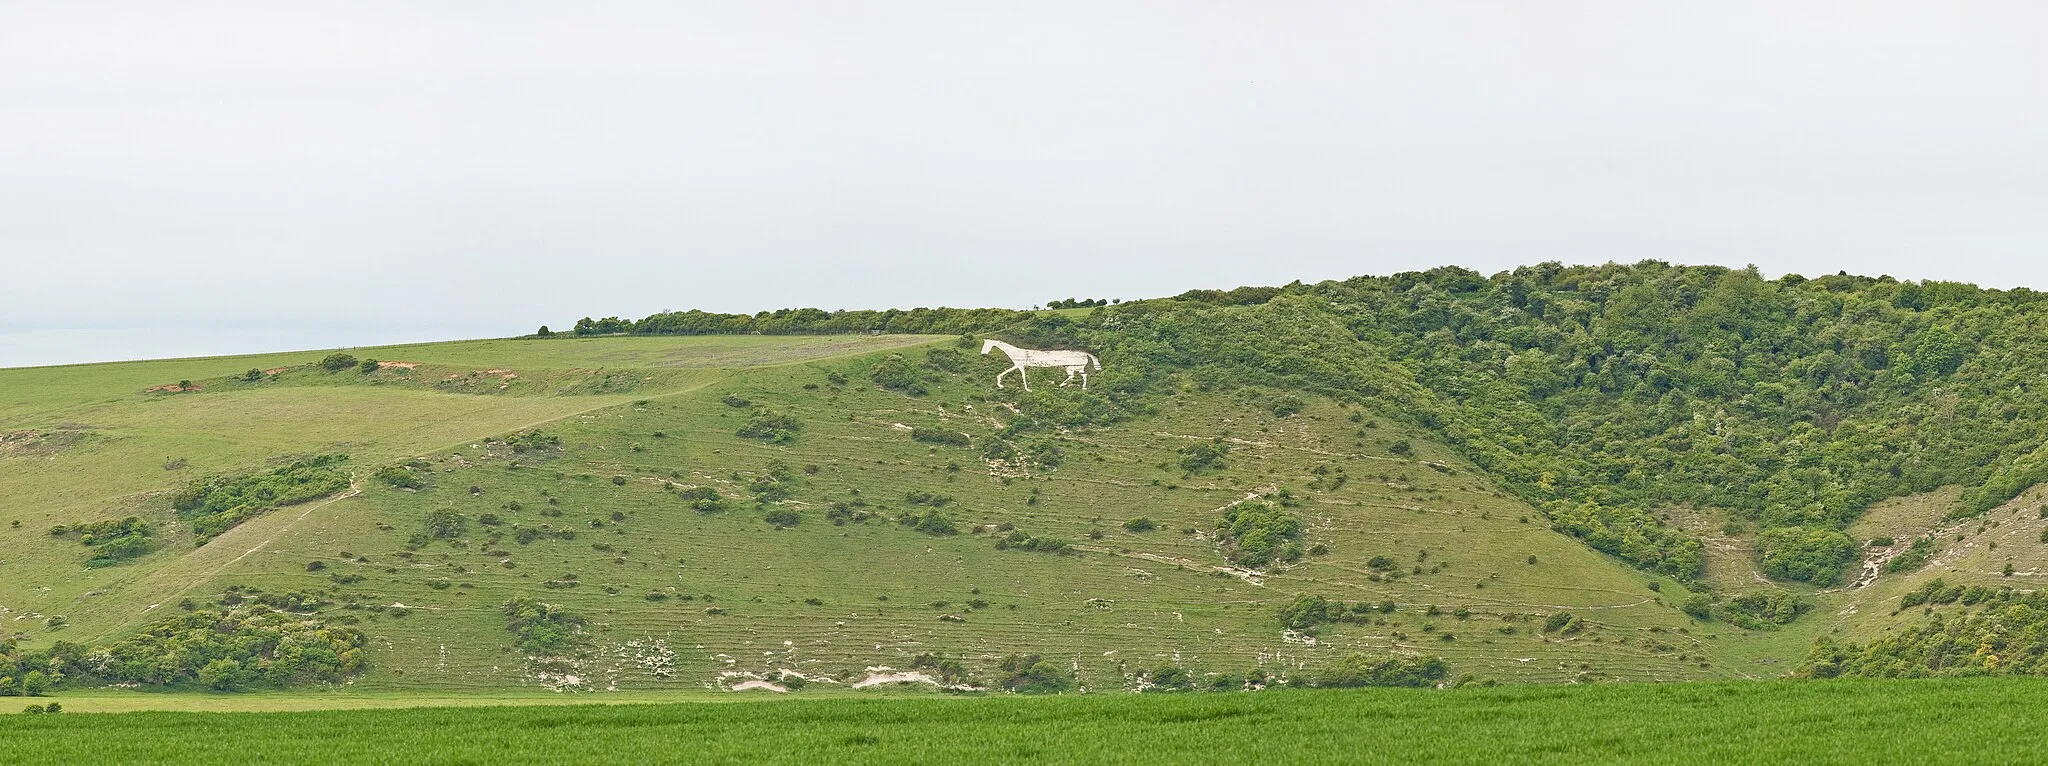 Photo showing: The chalk horse west of Littlington in the Cuckmere Valley, East Sussex, England.